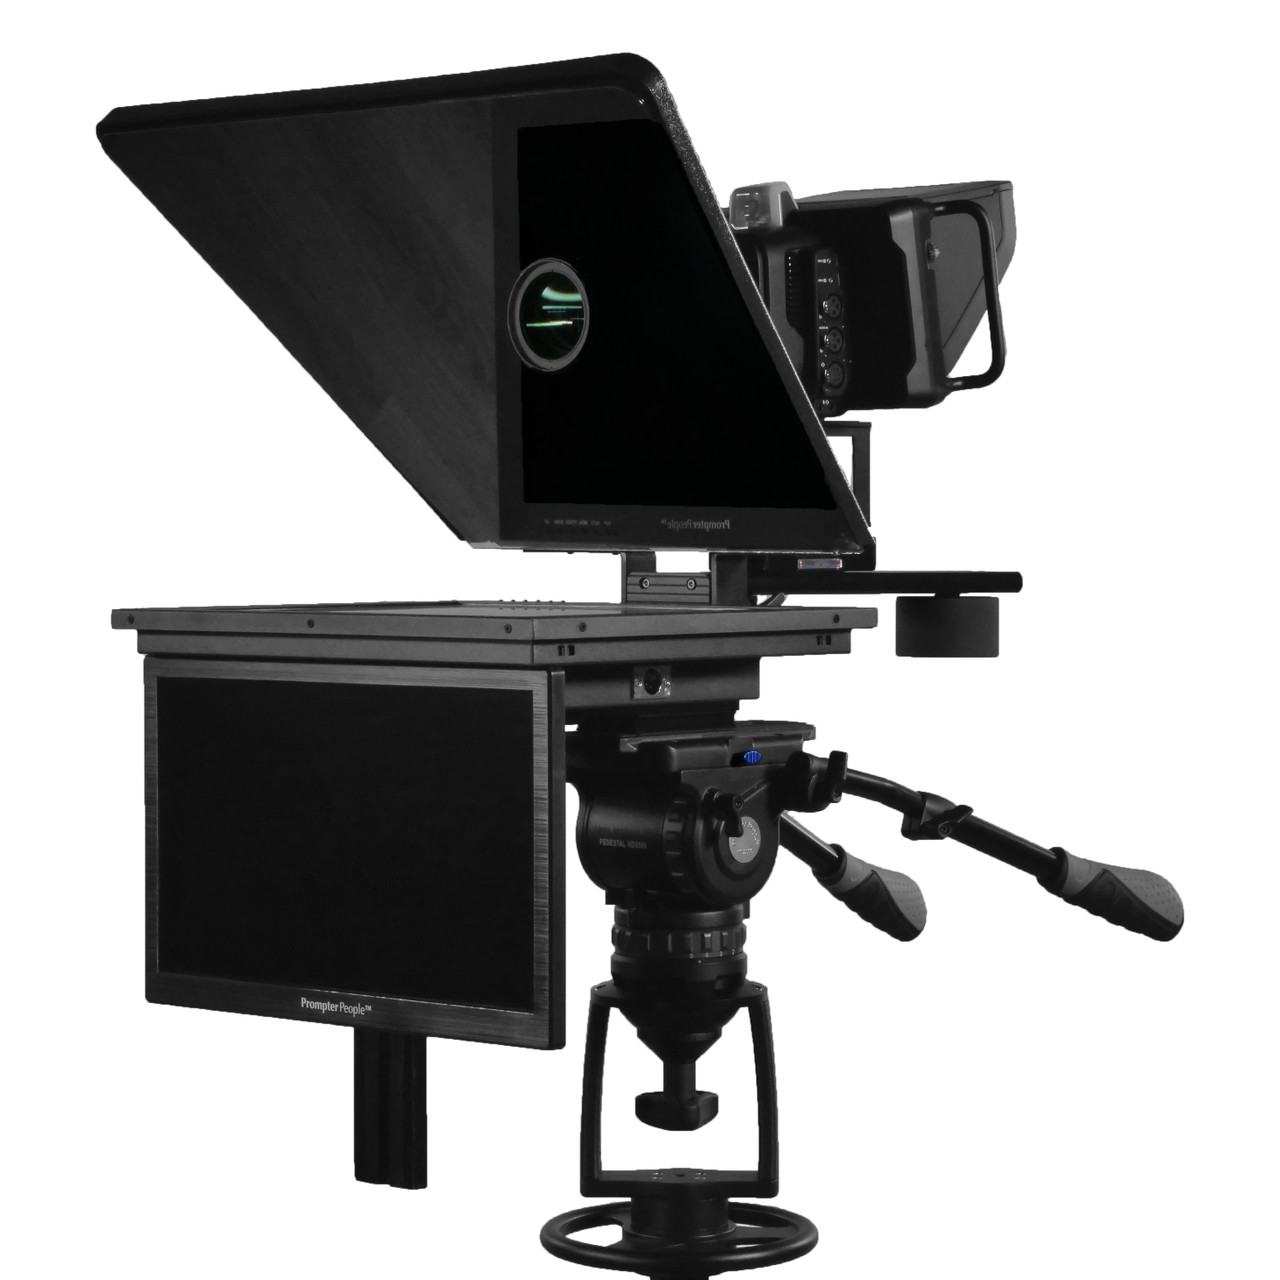 Flex Plus Talent Monitor Teleprompter | 17" 400 NIT Regular Prompting Monitor HDMI | VGA with 15.6" Color Accurate RGB IPS 3G-SDI Talent Monitor